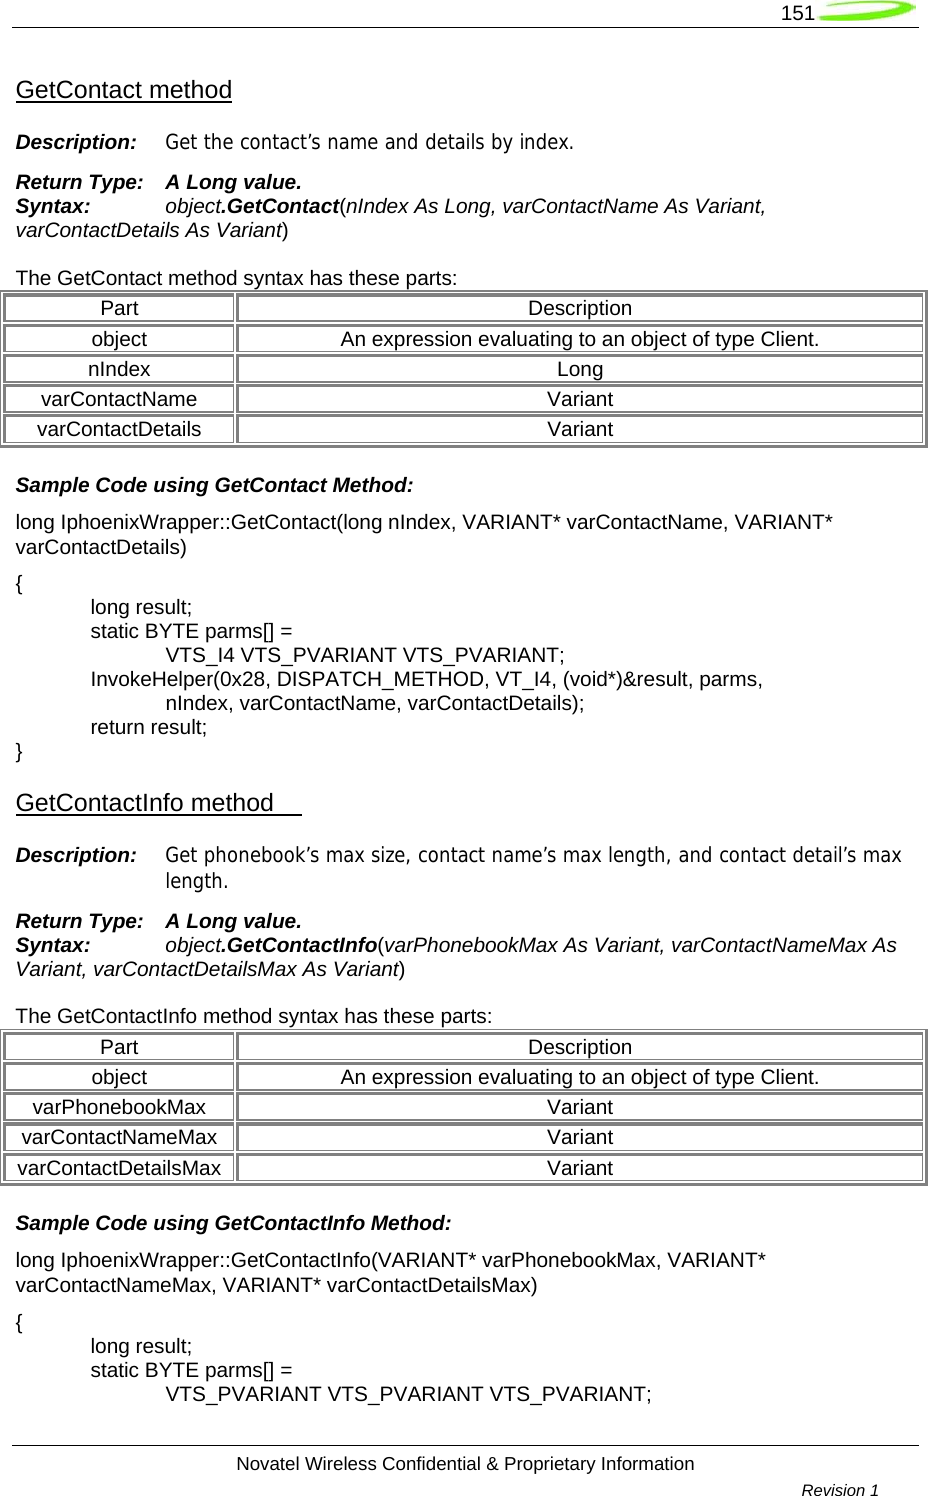   151  Novatel Wireless Confidential &amp; Proprietary Information        Revision 1   GetContact method Description:  Get the contact’s name and details by index. Return Type:  A Long value. Syntax:  object.GetContact(nIndex As Long, varContactName As Variant,  varContactDetails As Variant)  The GetContact method syntax has these parts: Part Description object  An expression evaluating to an object of type Client. nIndex Long varContactName Variant varContactDetails Variant Sample Code using GetContact Method: long IphoenixWrapper::GetContact(long nIndex, VARIANT* varContactName, VARIANT* varContactDetails) {  long result;   static BYTE parms[] =   VTS_I4 VTS_PVARIANT VTS_PVARIANT;  InvokeHelper(0x28, DISPATCH_METHOD, VT_I4, (void*)&amp;result, parms,   nIndex, varContactName, varContactDetails);  return result; } GetContactInfo method     Description:  Get phonebook’s max size, contact name’s max length, and contact detail’s max length. Return Type:  A Long value. Syntax:  object.GetContactInfo(varPhonebookMax As Variant, varContactNameMax As Variant, varContactDetailsMax As Variant)  The GetContactInfo method syntax has these parts: Part Description object  An expression evaluating to an object of type Client. varPhonebookMax Variant varContactNameMax Variant varContactDetailsMax Variant Sample Code using GetContactInfo Method: long IphoenixWrapper::GetContactInfo(VARIANT* varPhonebookMax, VARIANT* varContactNameMax, VARIANT* varContactDetailsMax) {  long result;   static BYTE parms[] =   VTS_PVARIANT VTS_PVARIANT VTS_PVARIANT; 